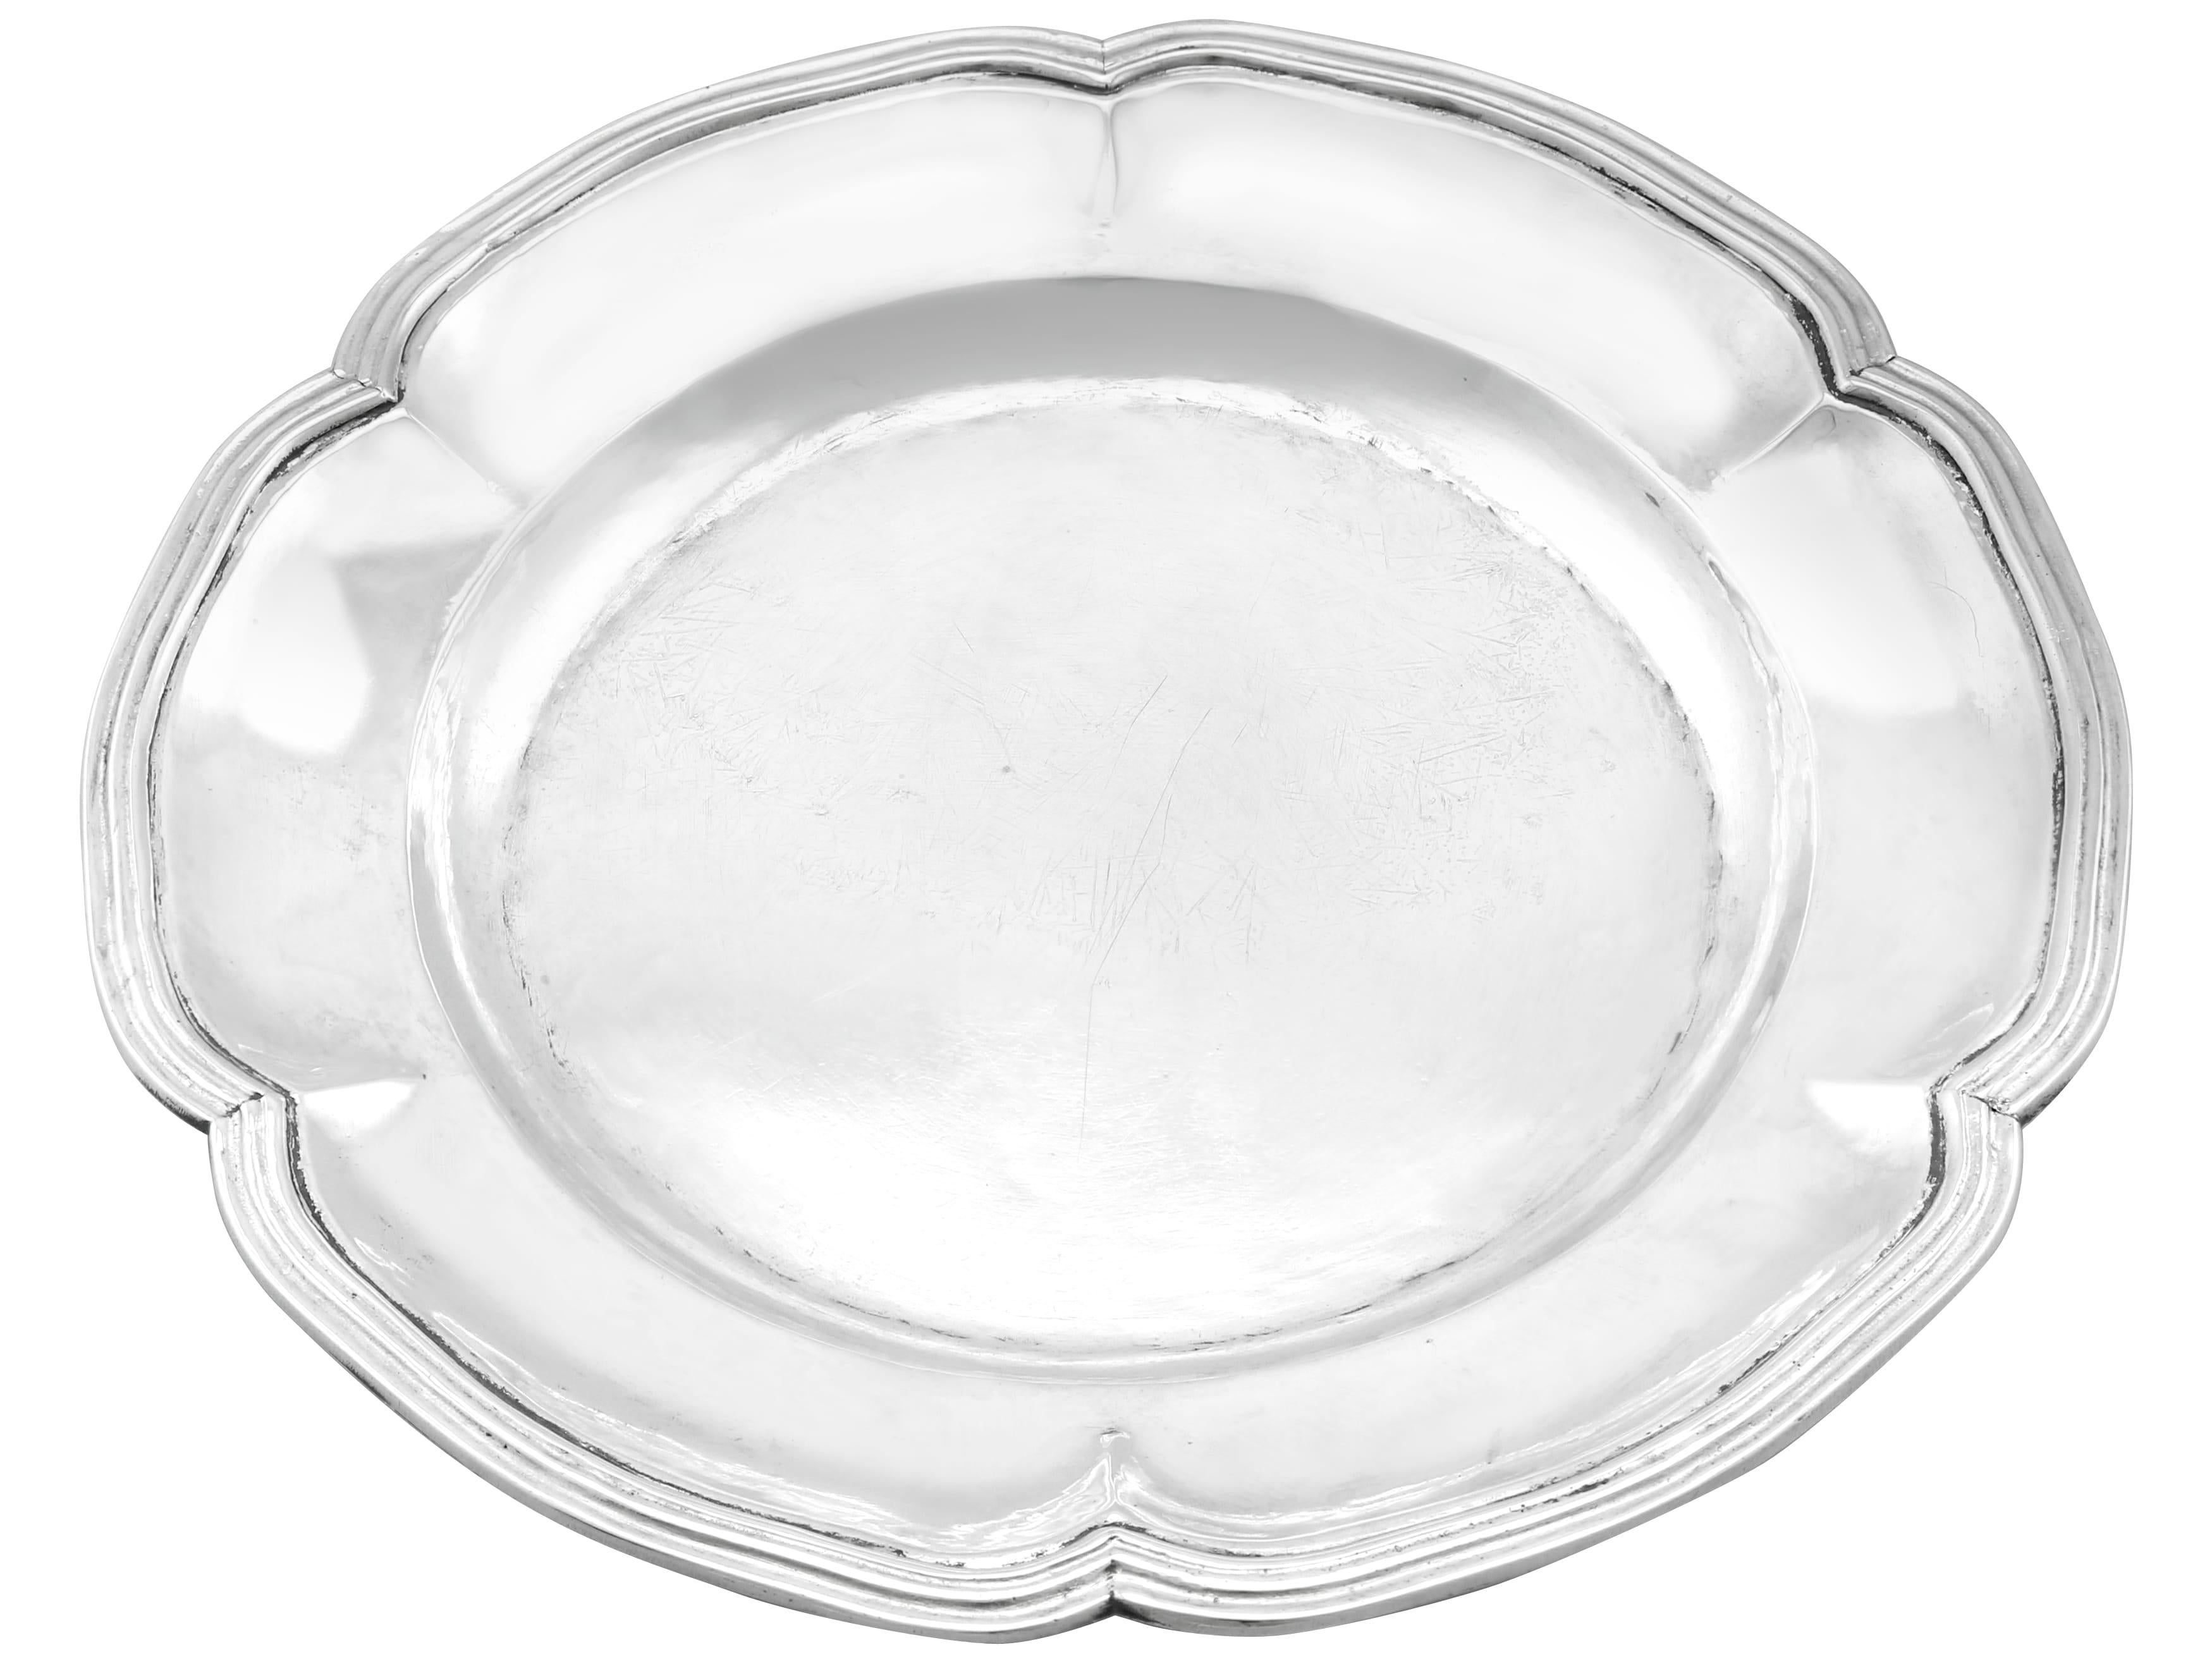 Antique Set of Four Spanish Silver Dinner Plates (1784) In Excellent Condition For Sale In Jesmond, Newcastle Upon Tyne